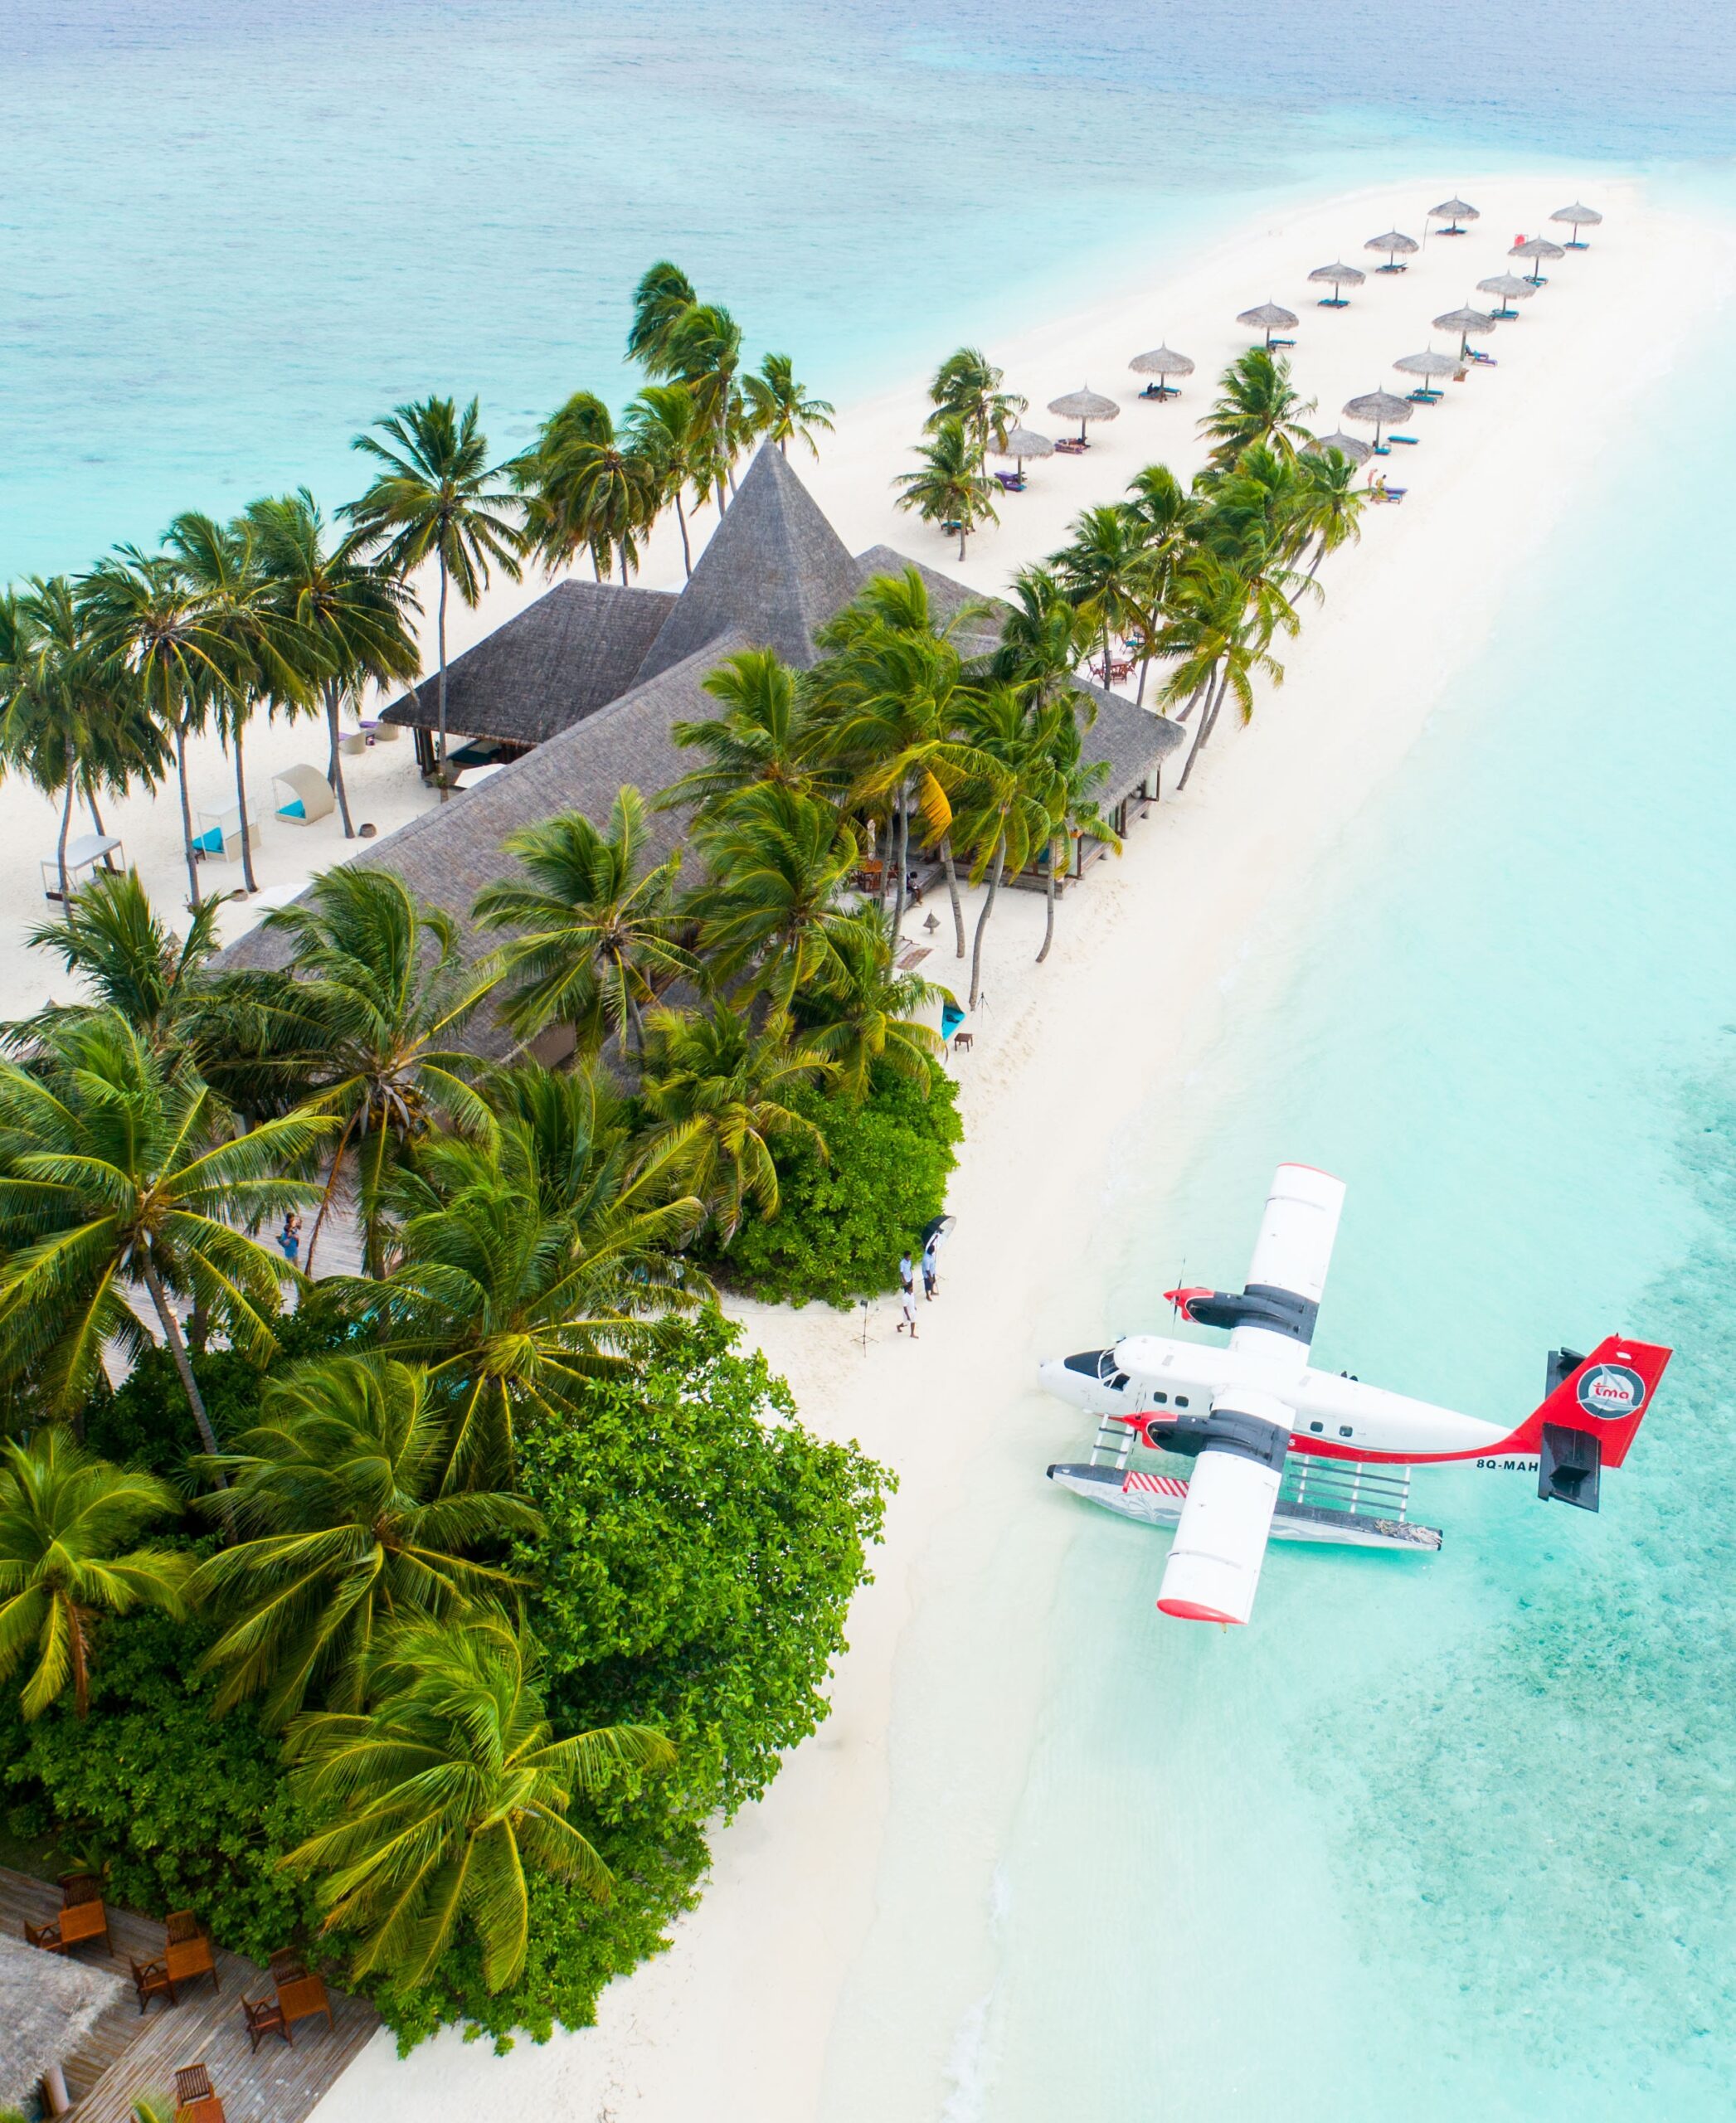 Exploring exotic islands like the maldives with one of the best adventure companies G Adventures